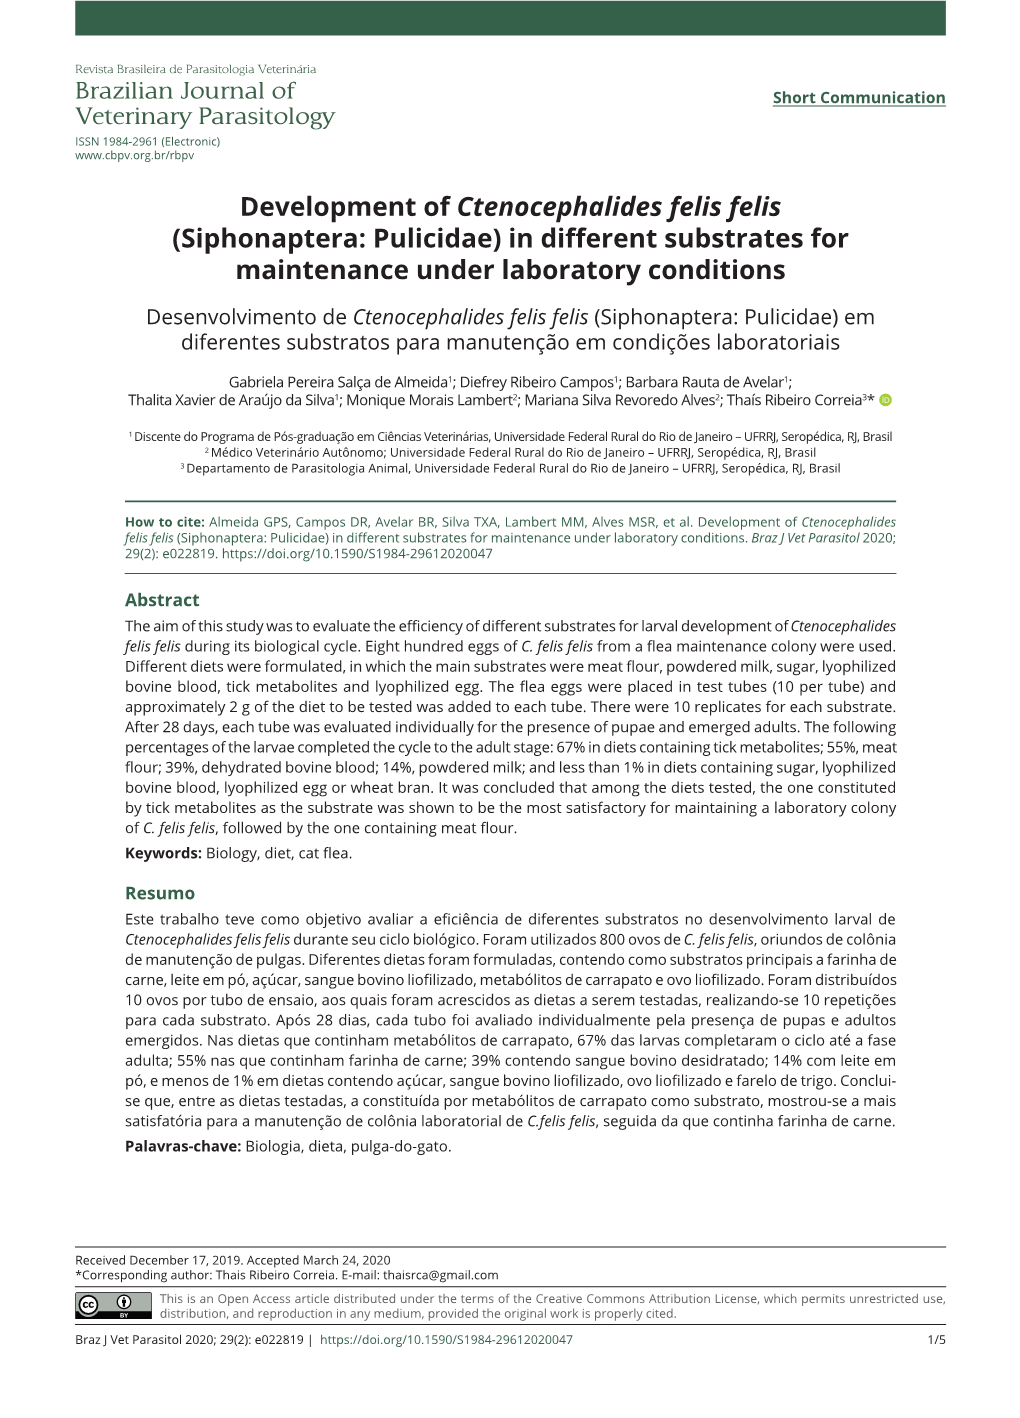 Development of Ctenocephalides Felis Felis (Siphonaptera: Pulicidae) in Different Substrates for Maintenance Under Laboratory Conditions